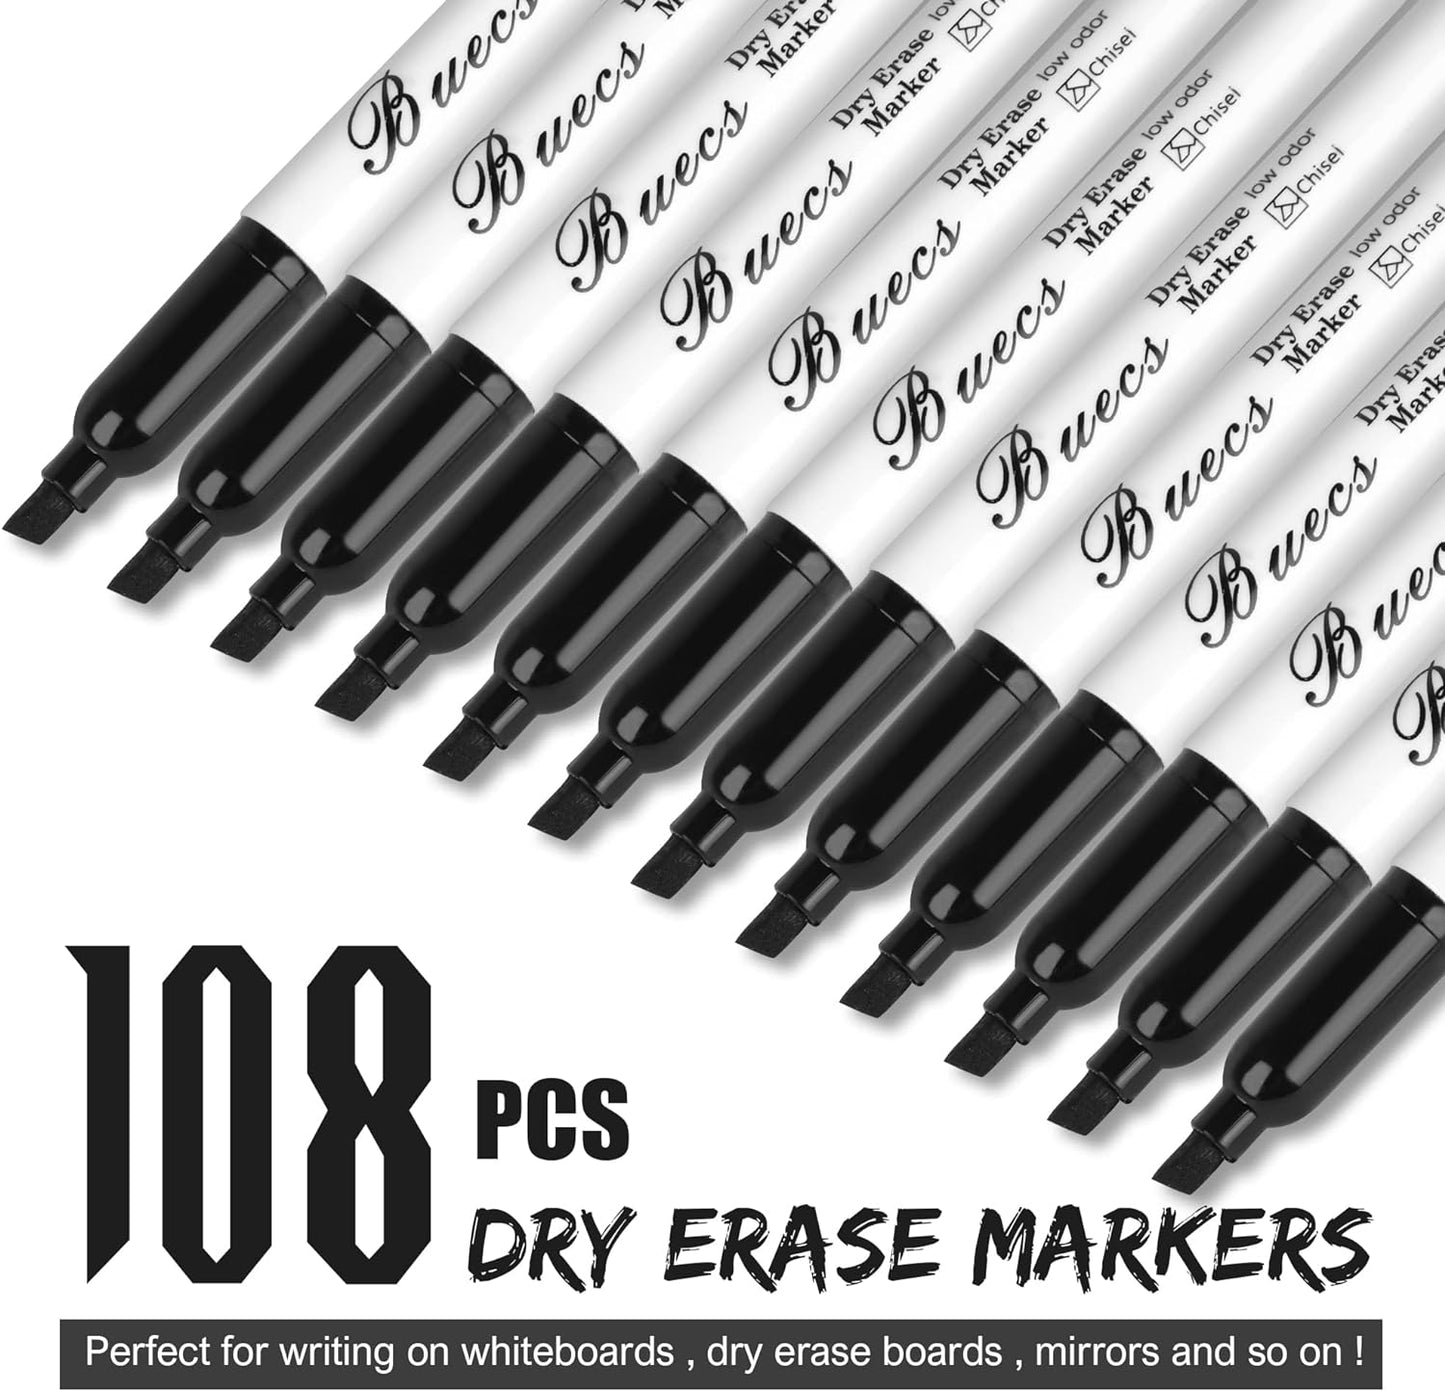 Black Dry Erase Markers, Low-Odor, 108 Count, Chisel Tip, Perfect for Writing on Whiteboards, Dry-Erase Boards, Glass, School Office Supplies